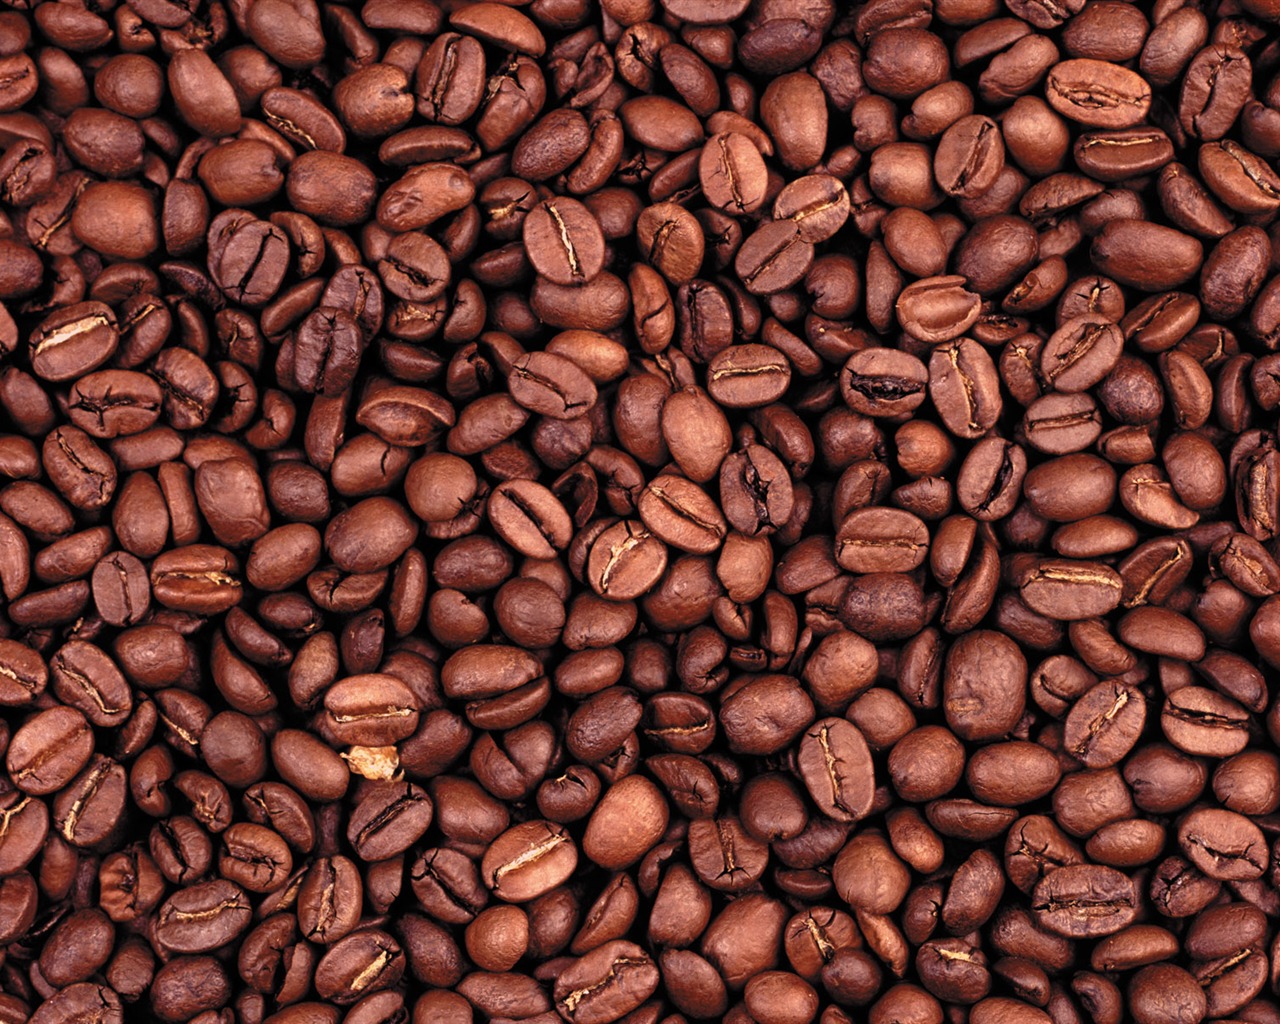 Coffee feature wallpaper (6) #11 - 1280x1024